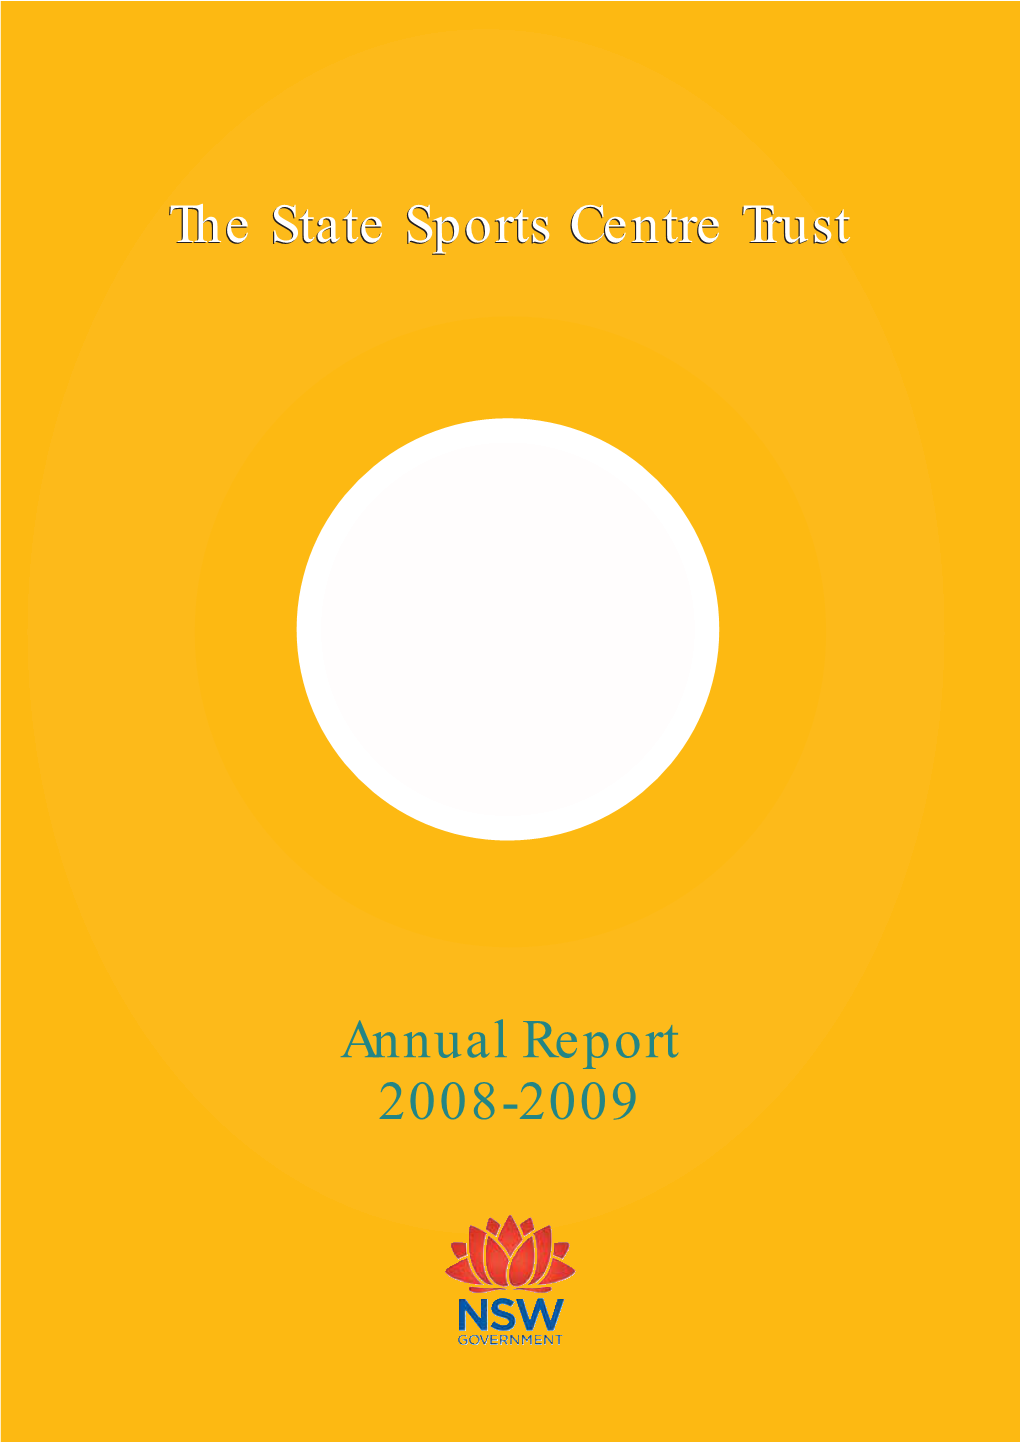 The State Sports Centre Trust